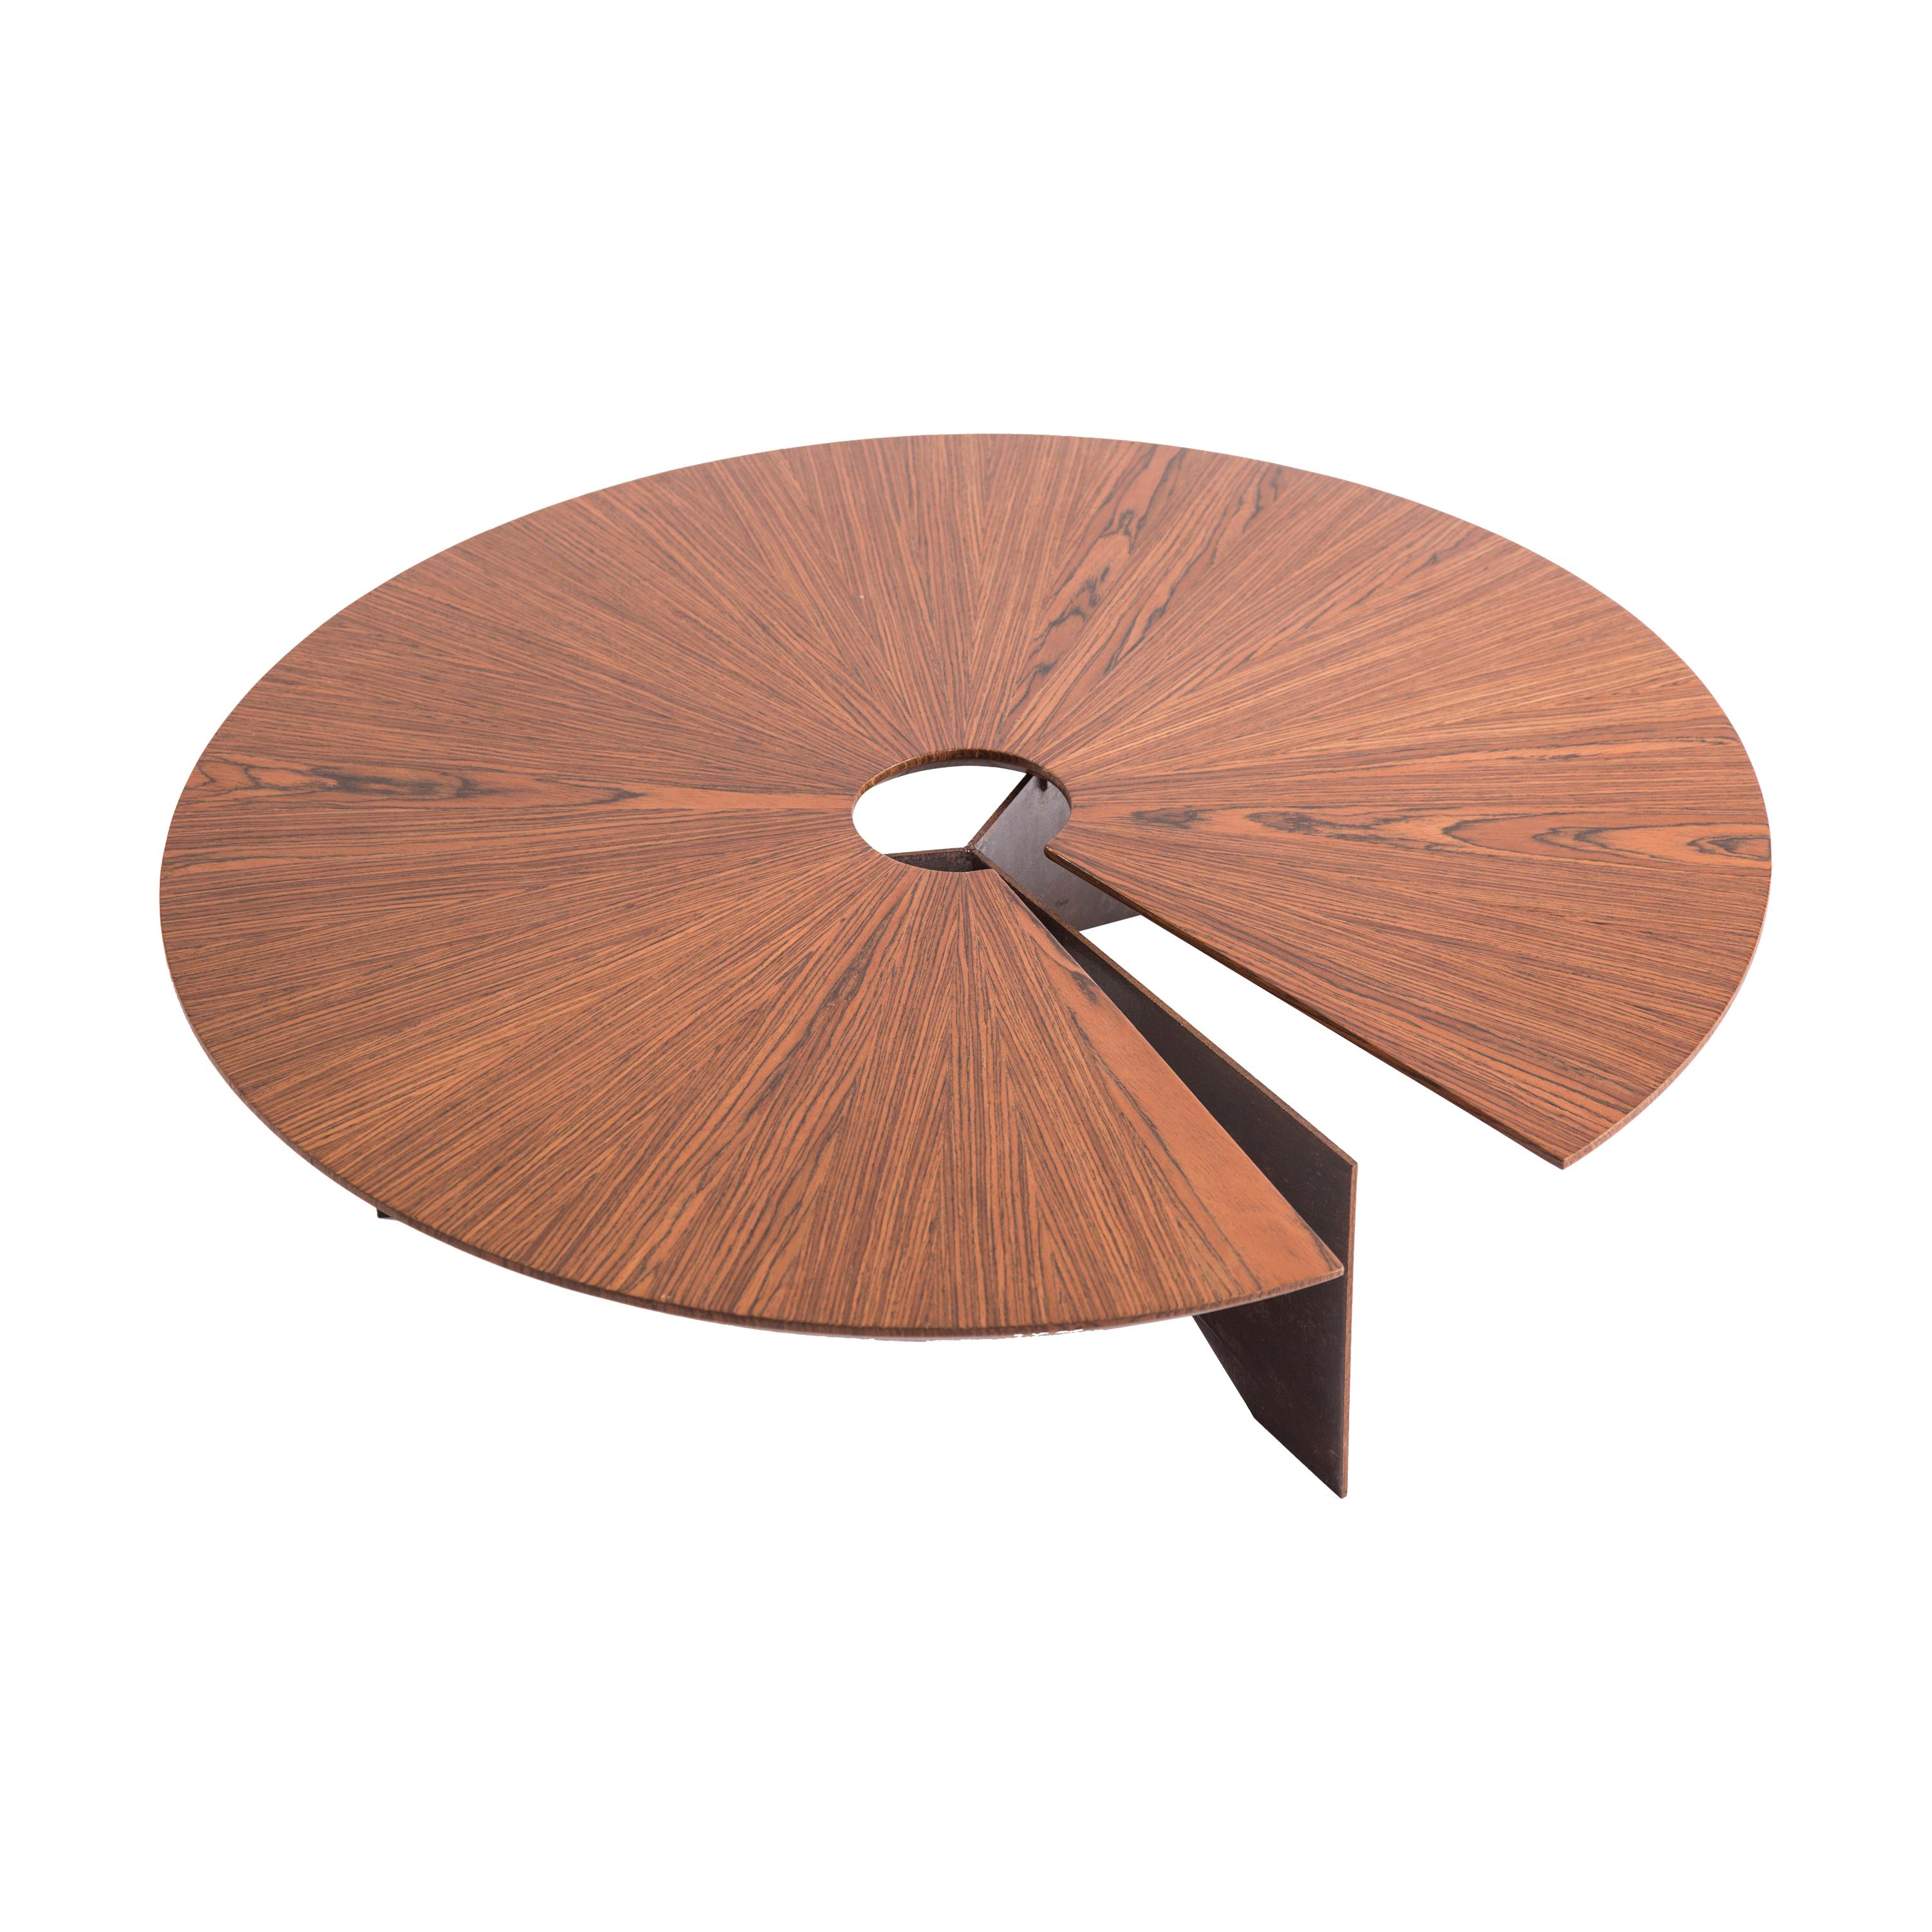 Contemporary Round Coffee SS Table by Decarvalho Atelier